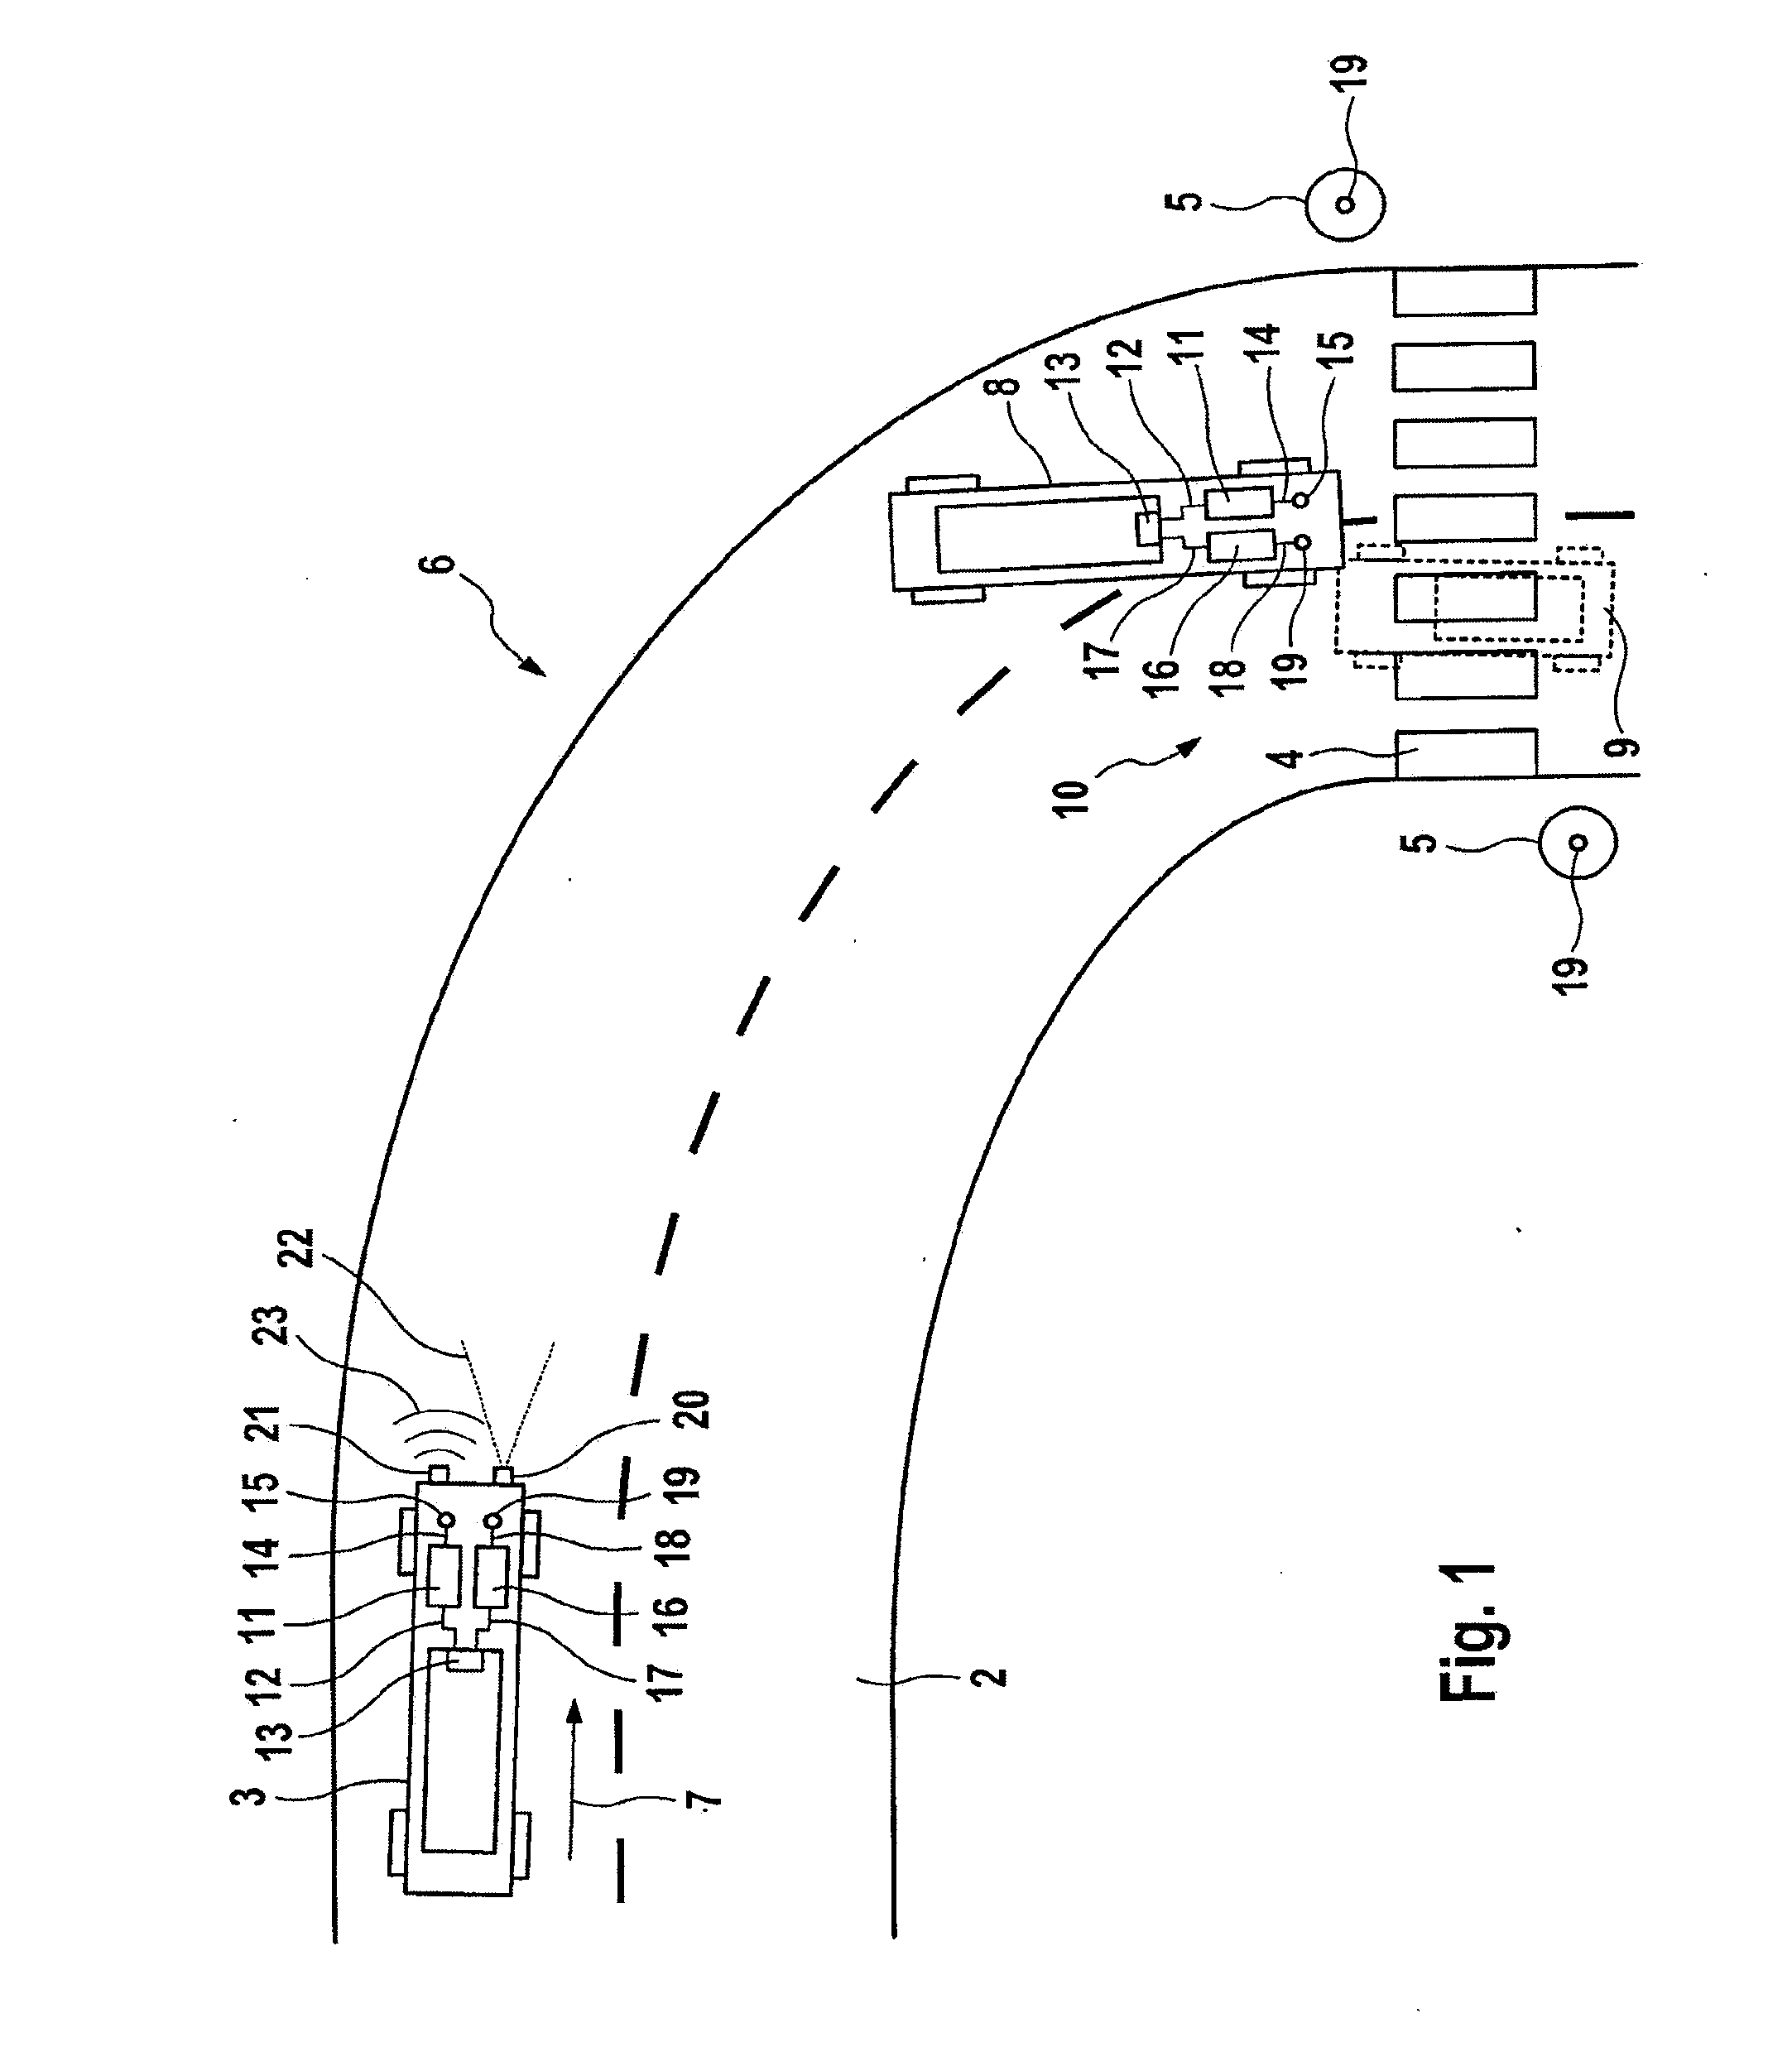 Car2x receiver filtering based on a receiving corridor in a geographic coordinate system